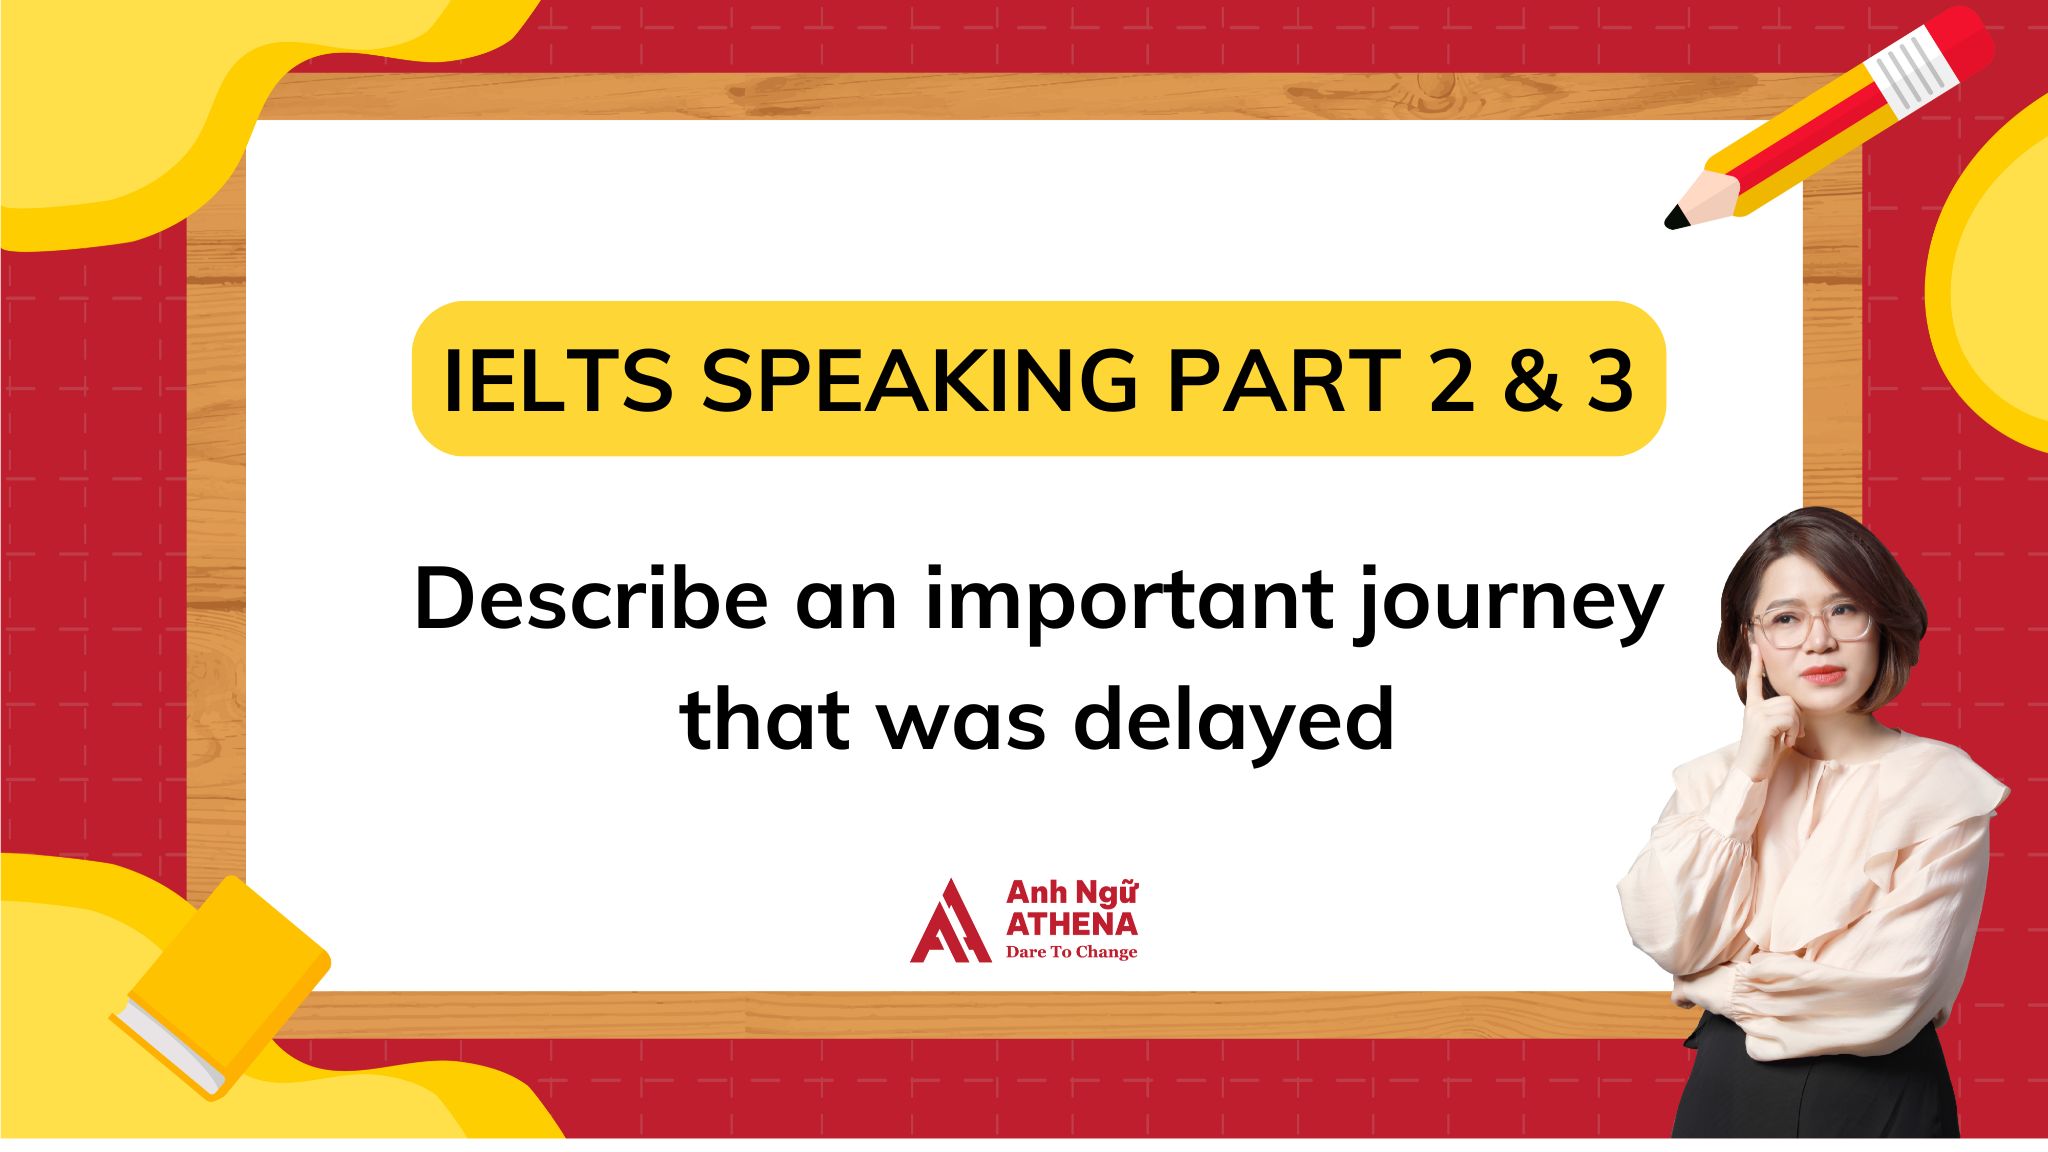 Giải đề: Describe an important journey that was delayed